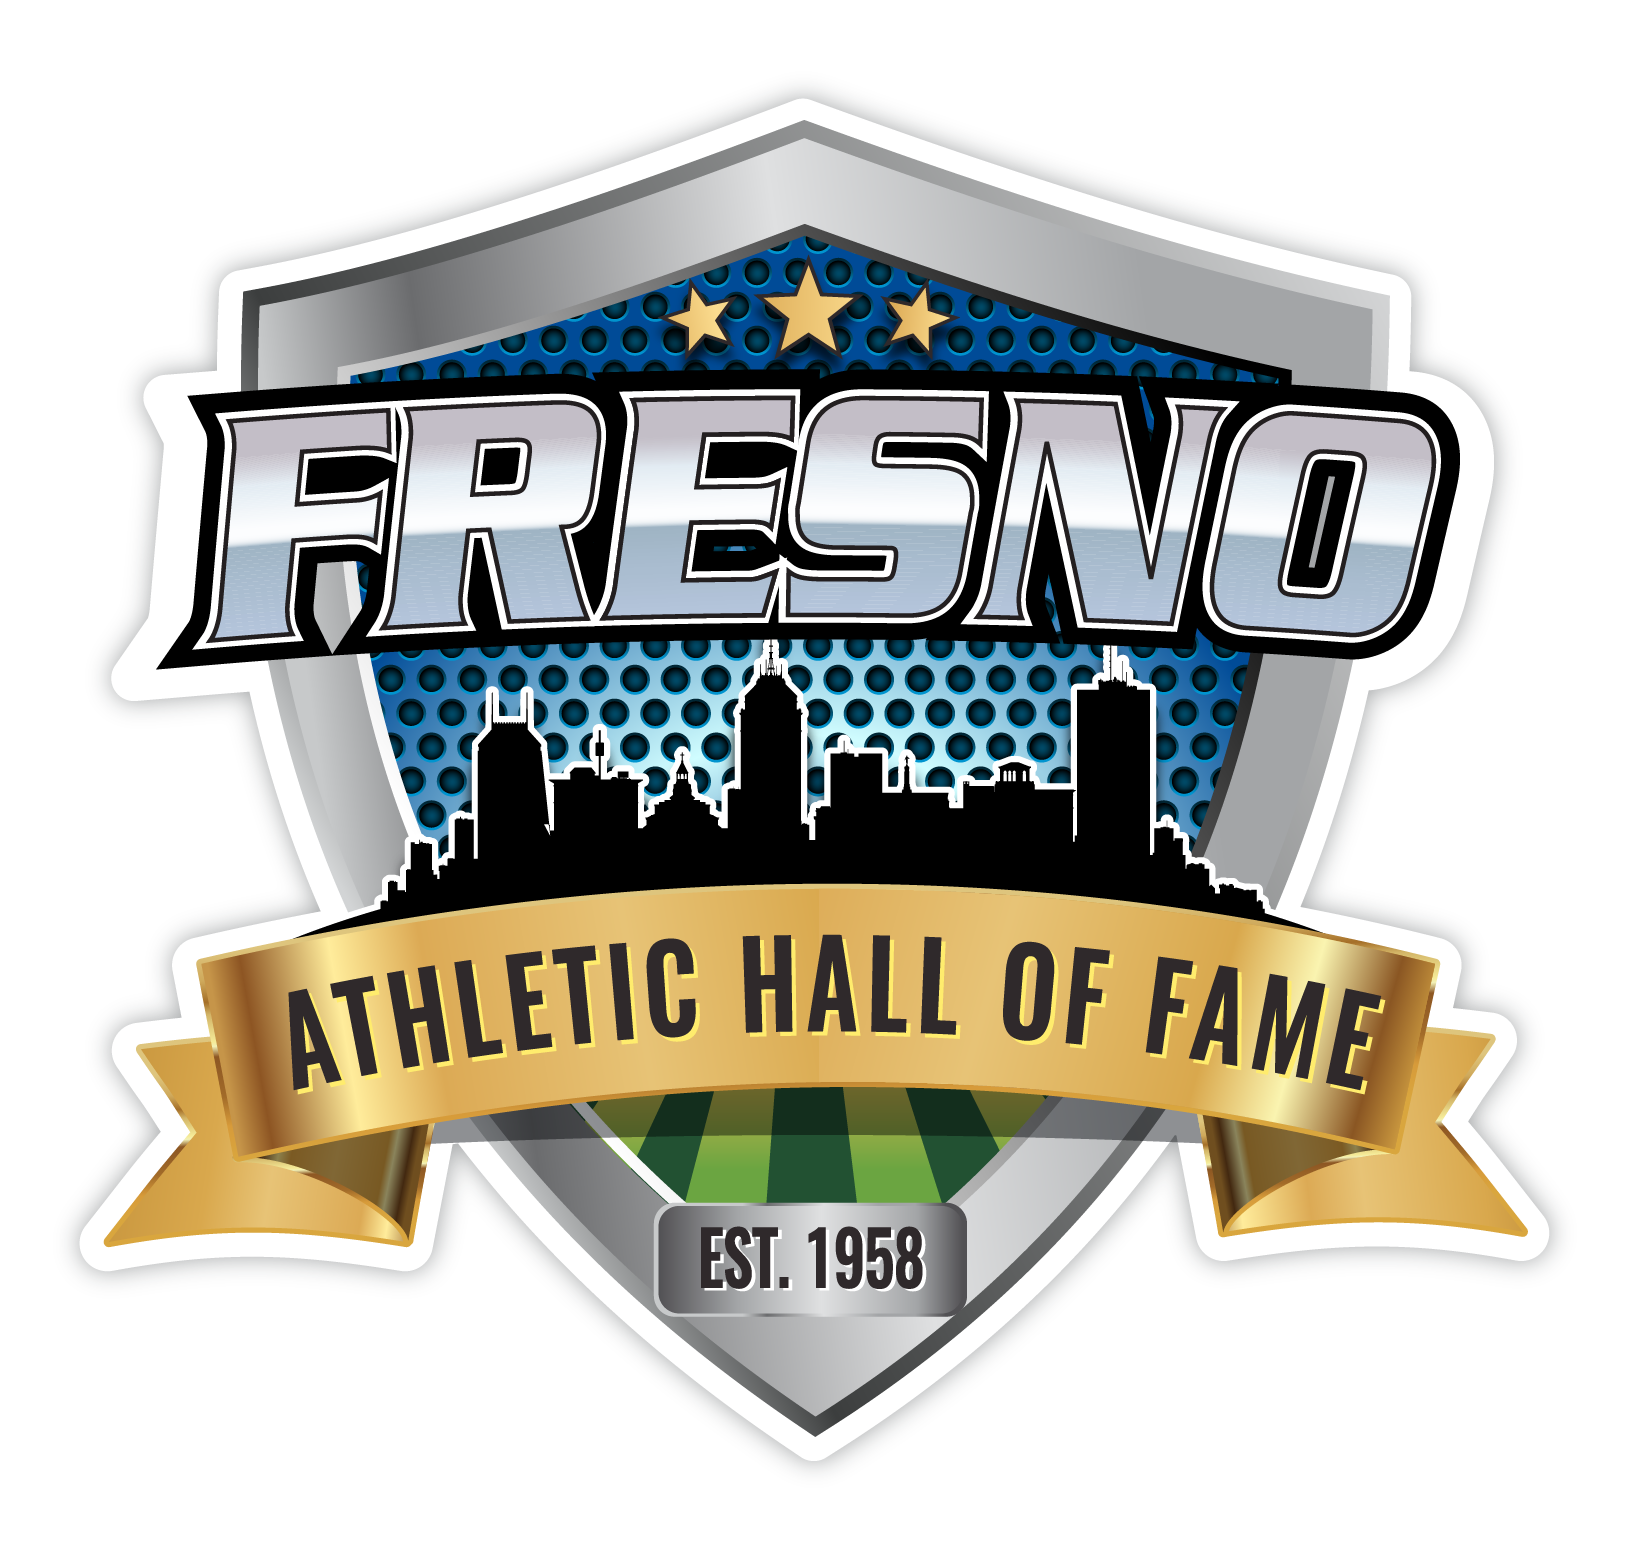 Fresno Athletic Hall of Fame